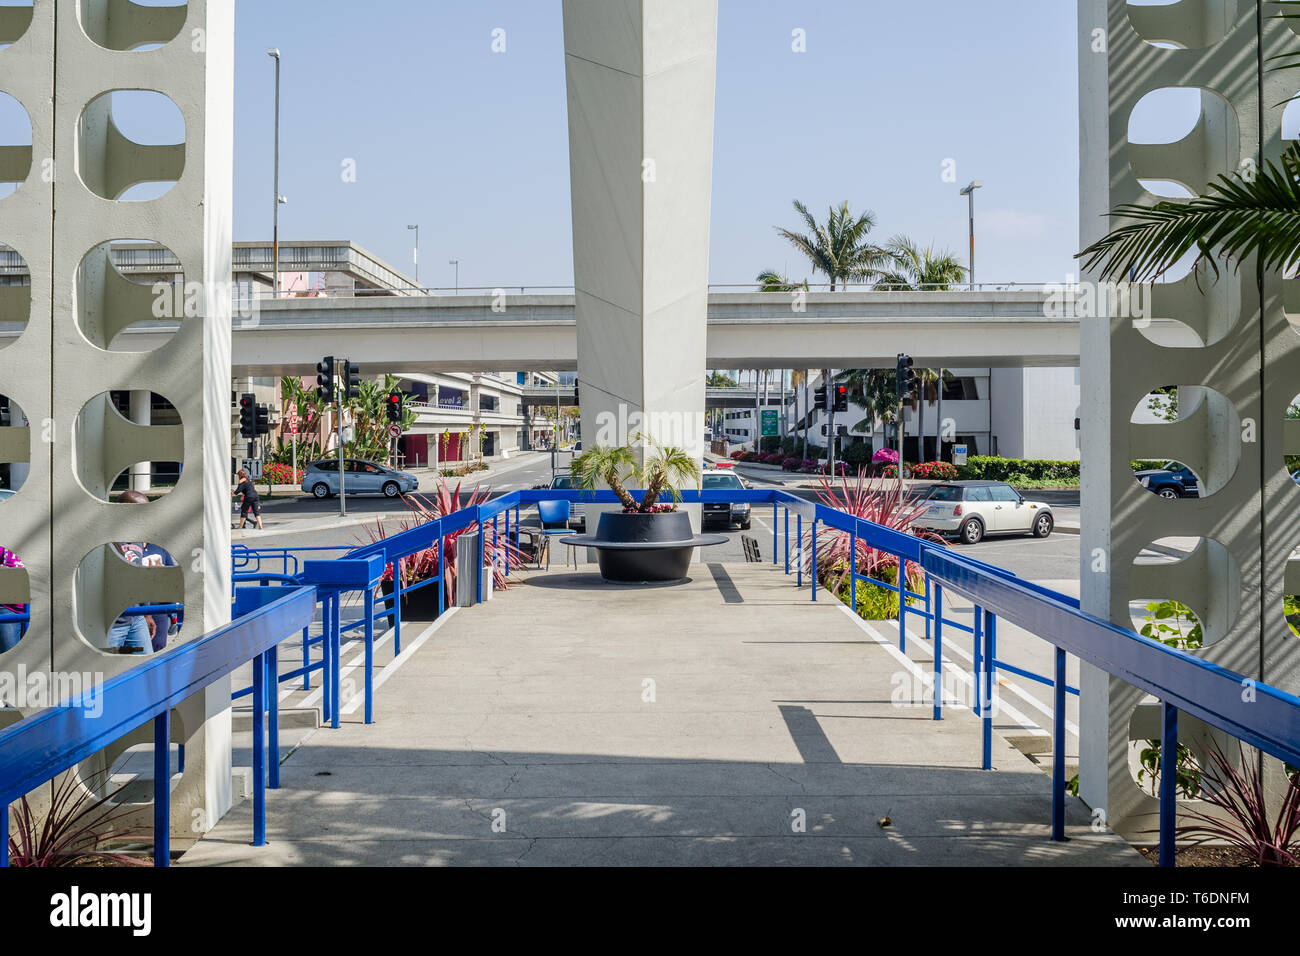 Los Angeles Airport Theme building close up from ground level with landscaping Stock Photo